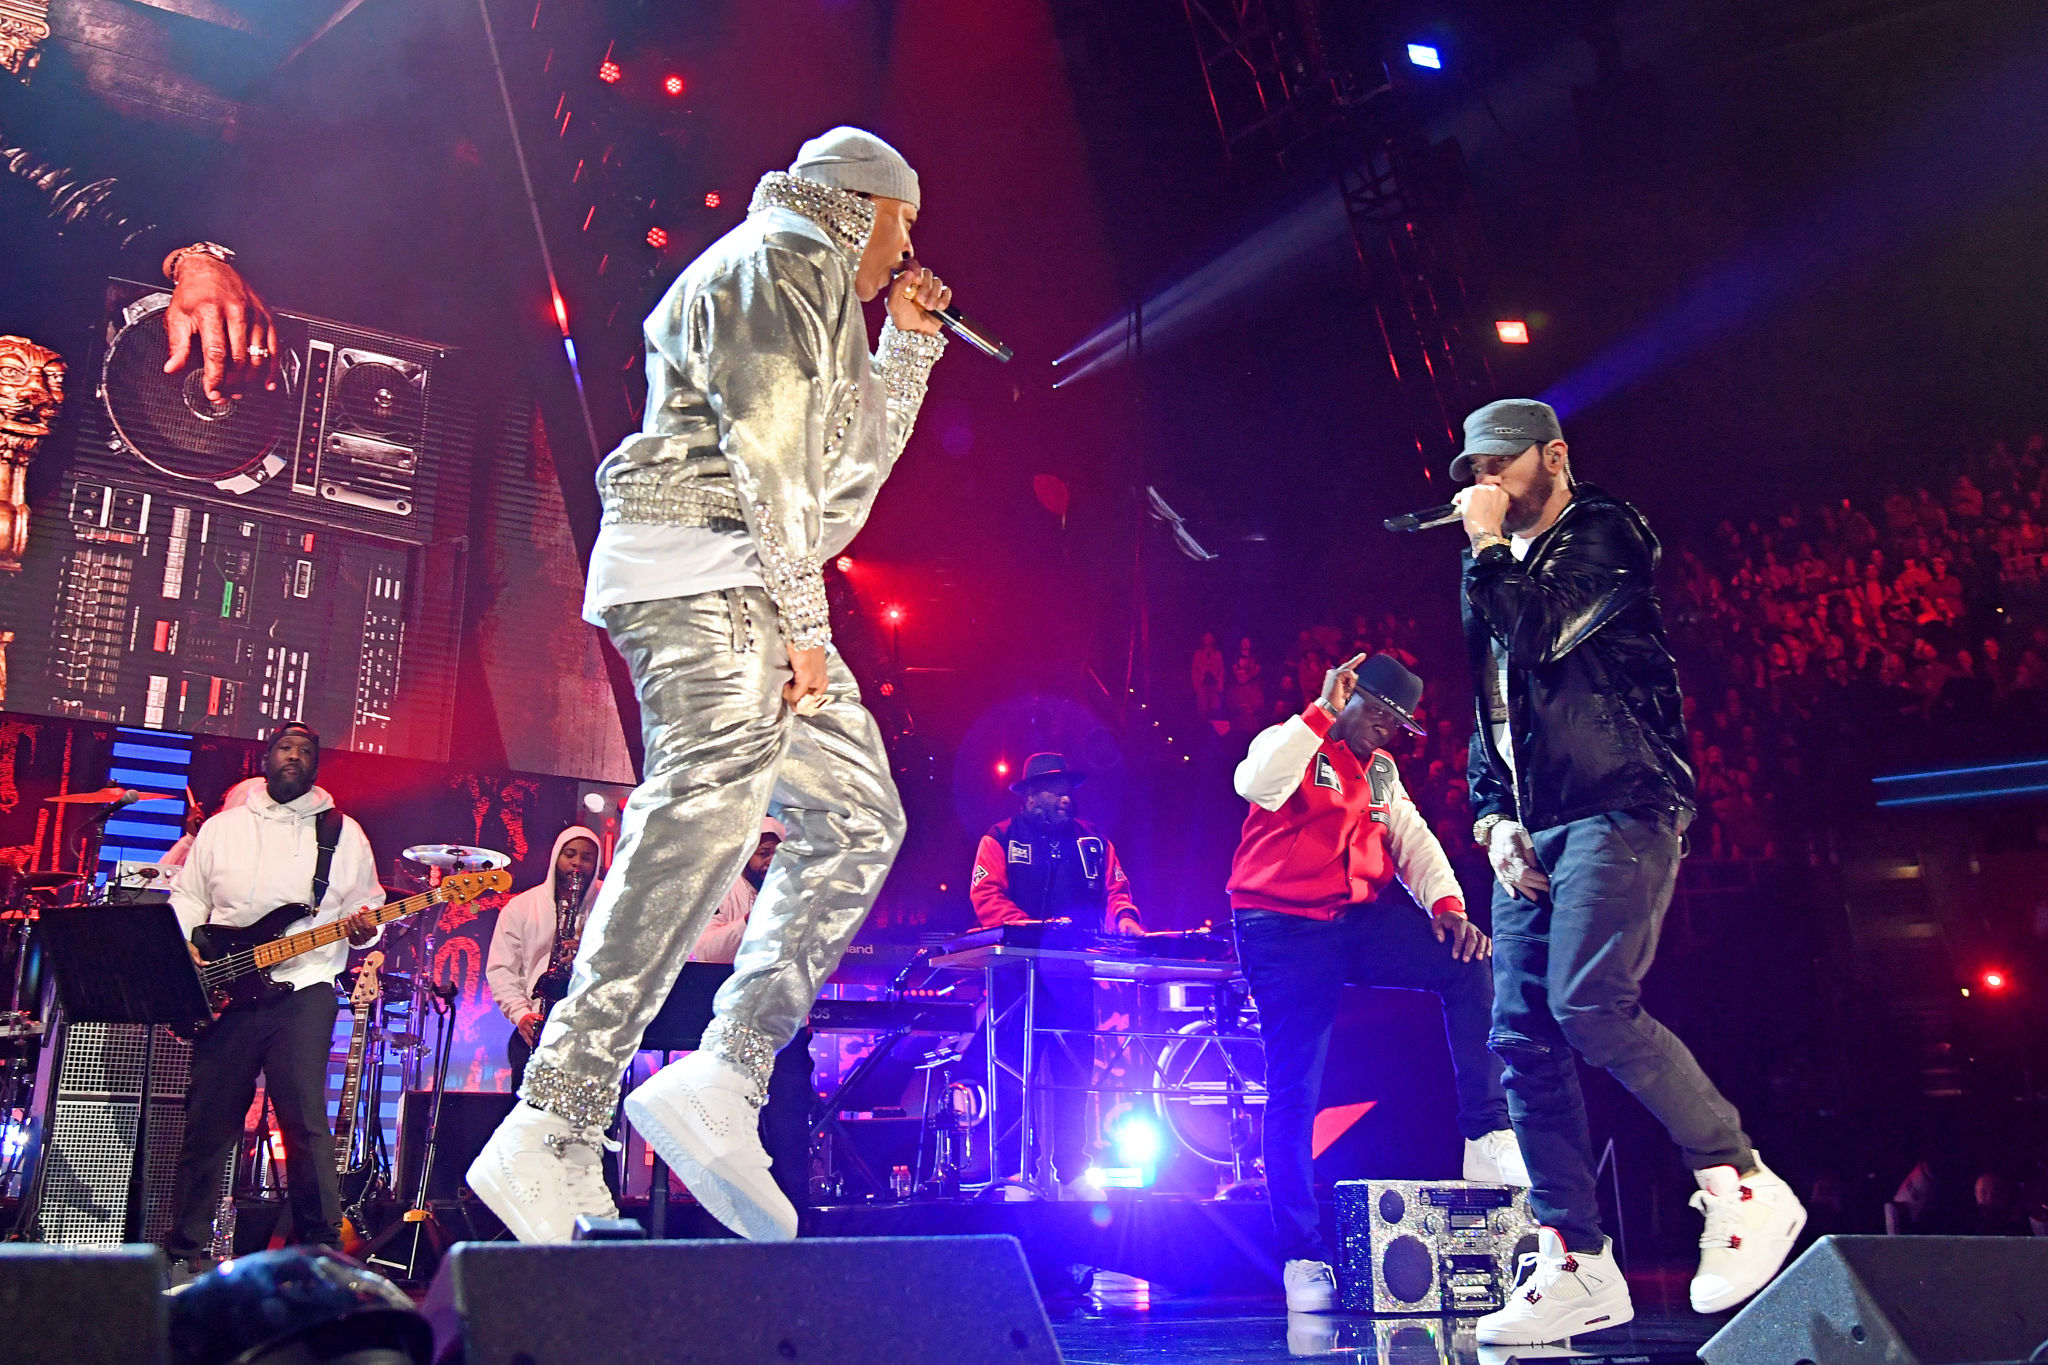 CLEVELAND, OHIO - OCTOBER 30: LL Cool J and Eminem performs onstage during the 36th Annual Rock & Roll Hall Of Fame Induction Ceremony at Rocket Mortgage Fieldhouse on October 30, 2021 in Cleveland, Ohio. (Photo by Kevin Mazur/Getty Images for The Rock and Roll Hall of Fame )